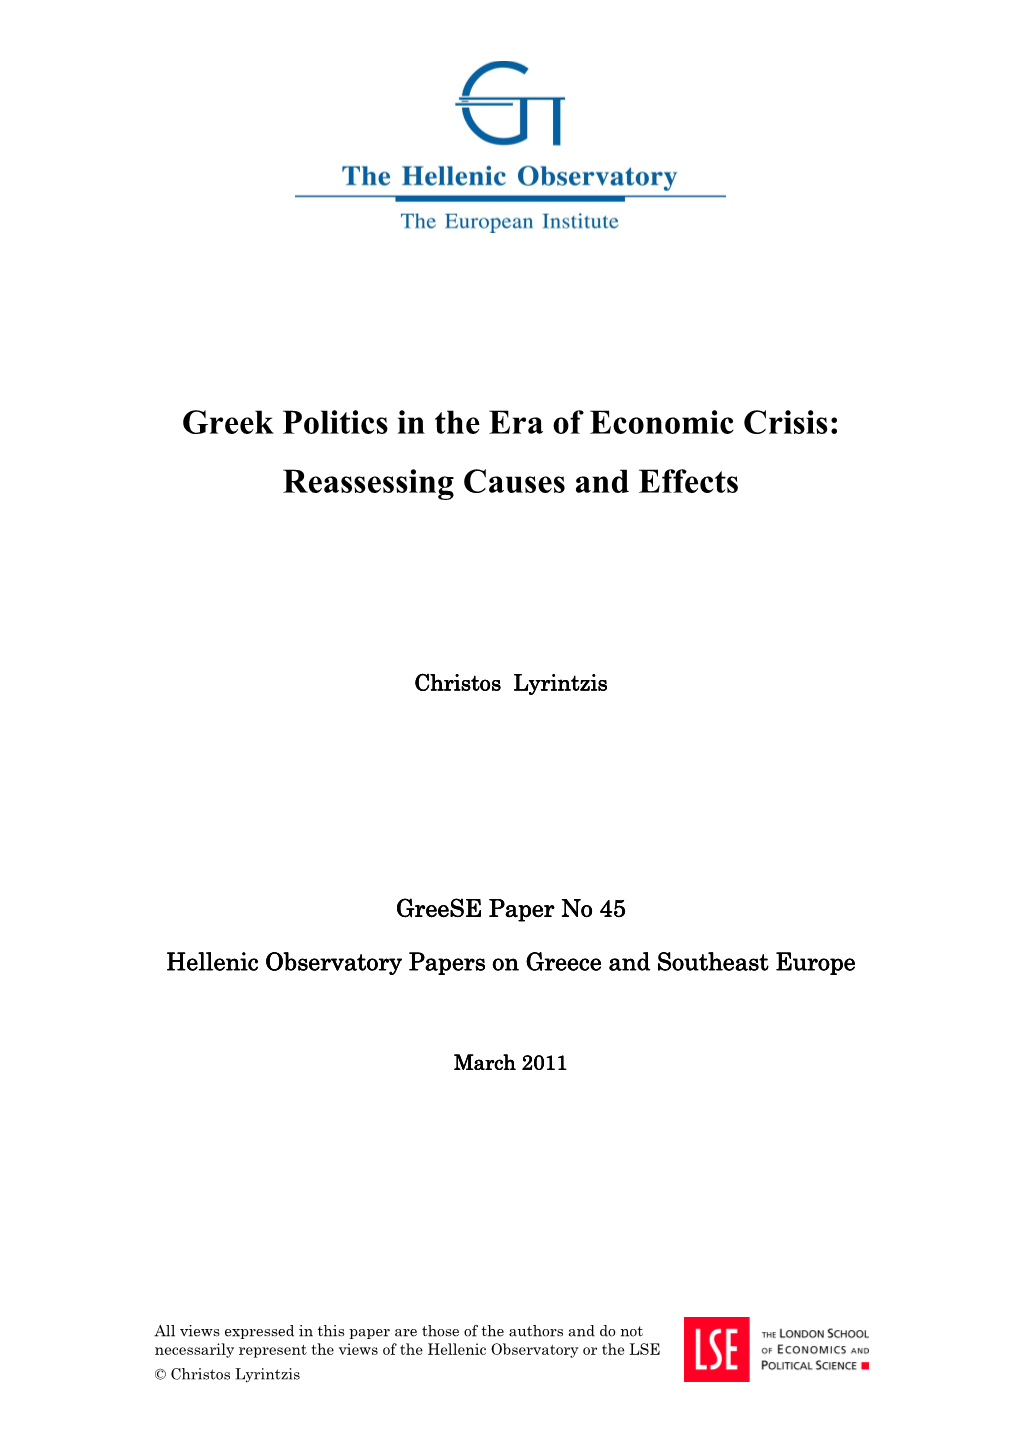 Greek Politics in the Era of Economic Crisis: Reassessing Causes and Effects